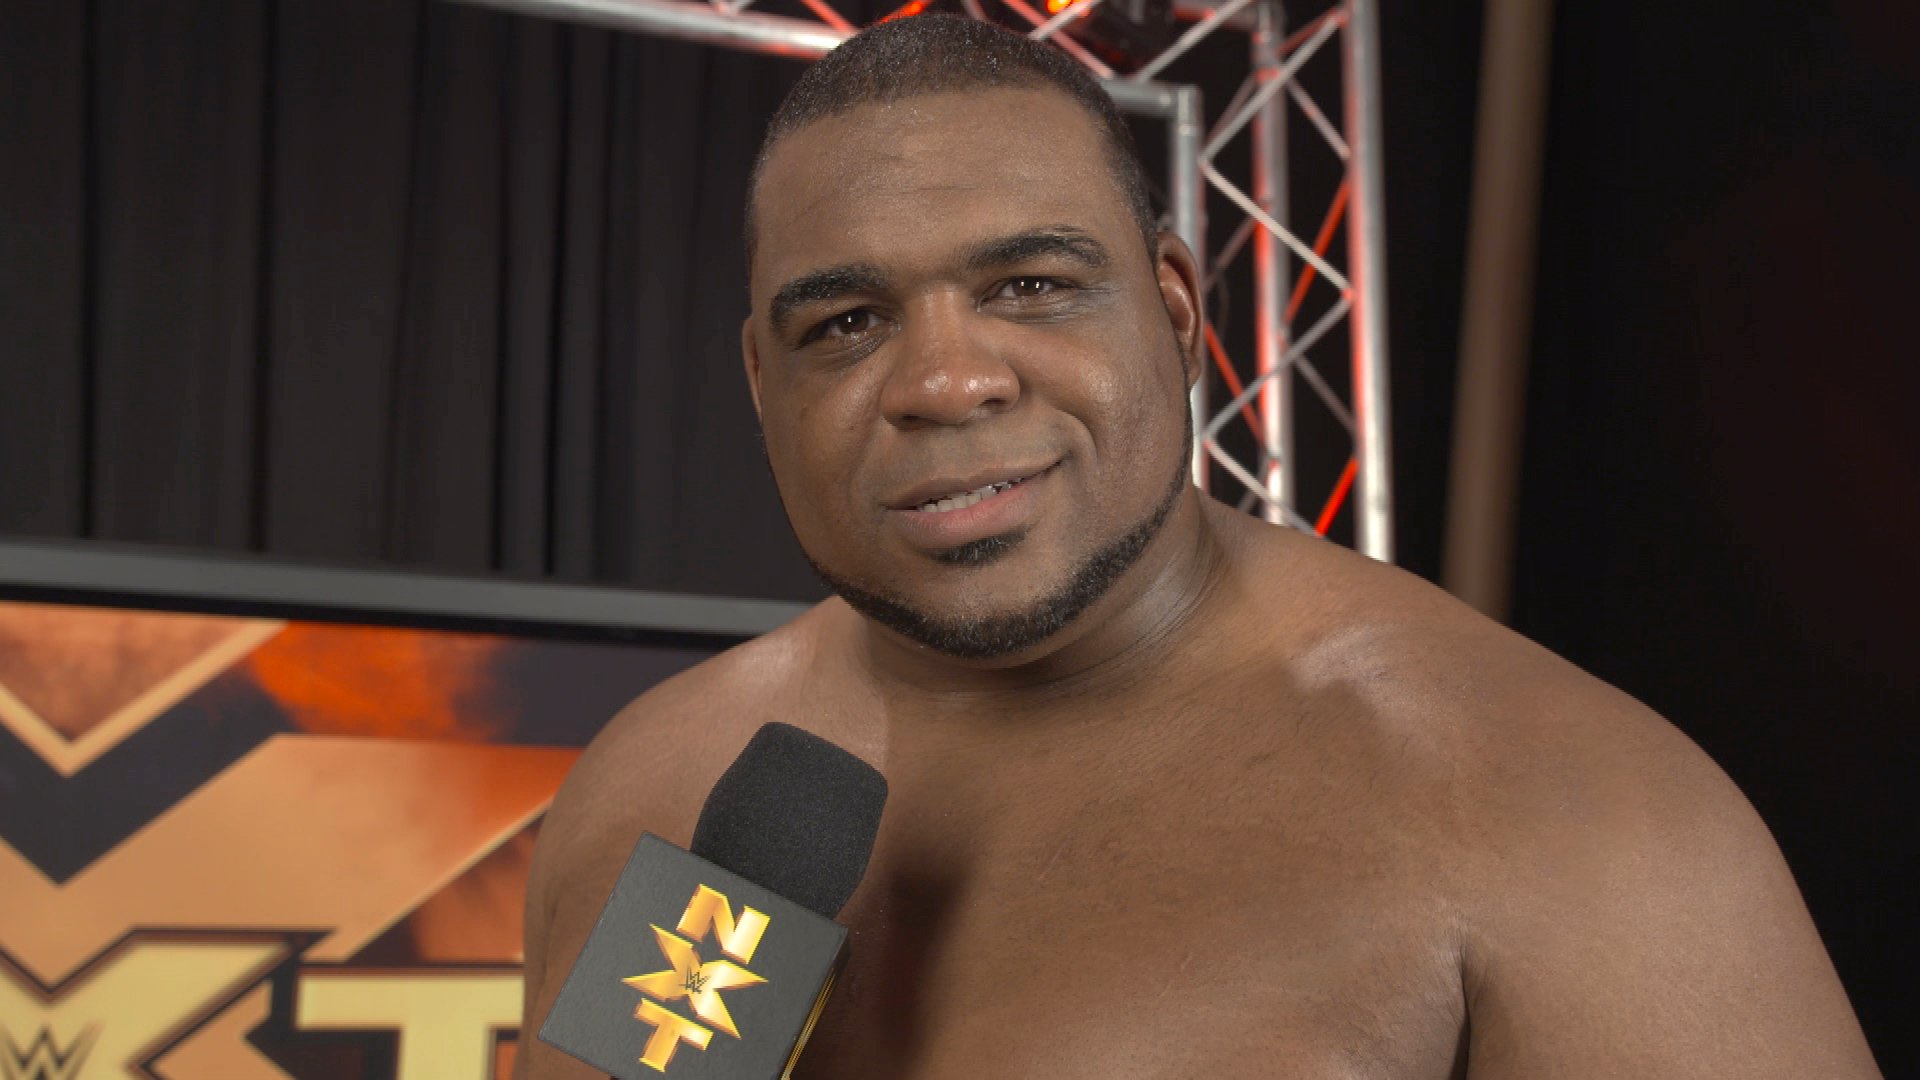 Keith Lee drugged by woman in bar